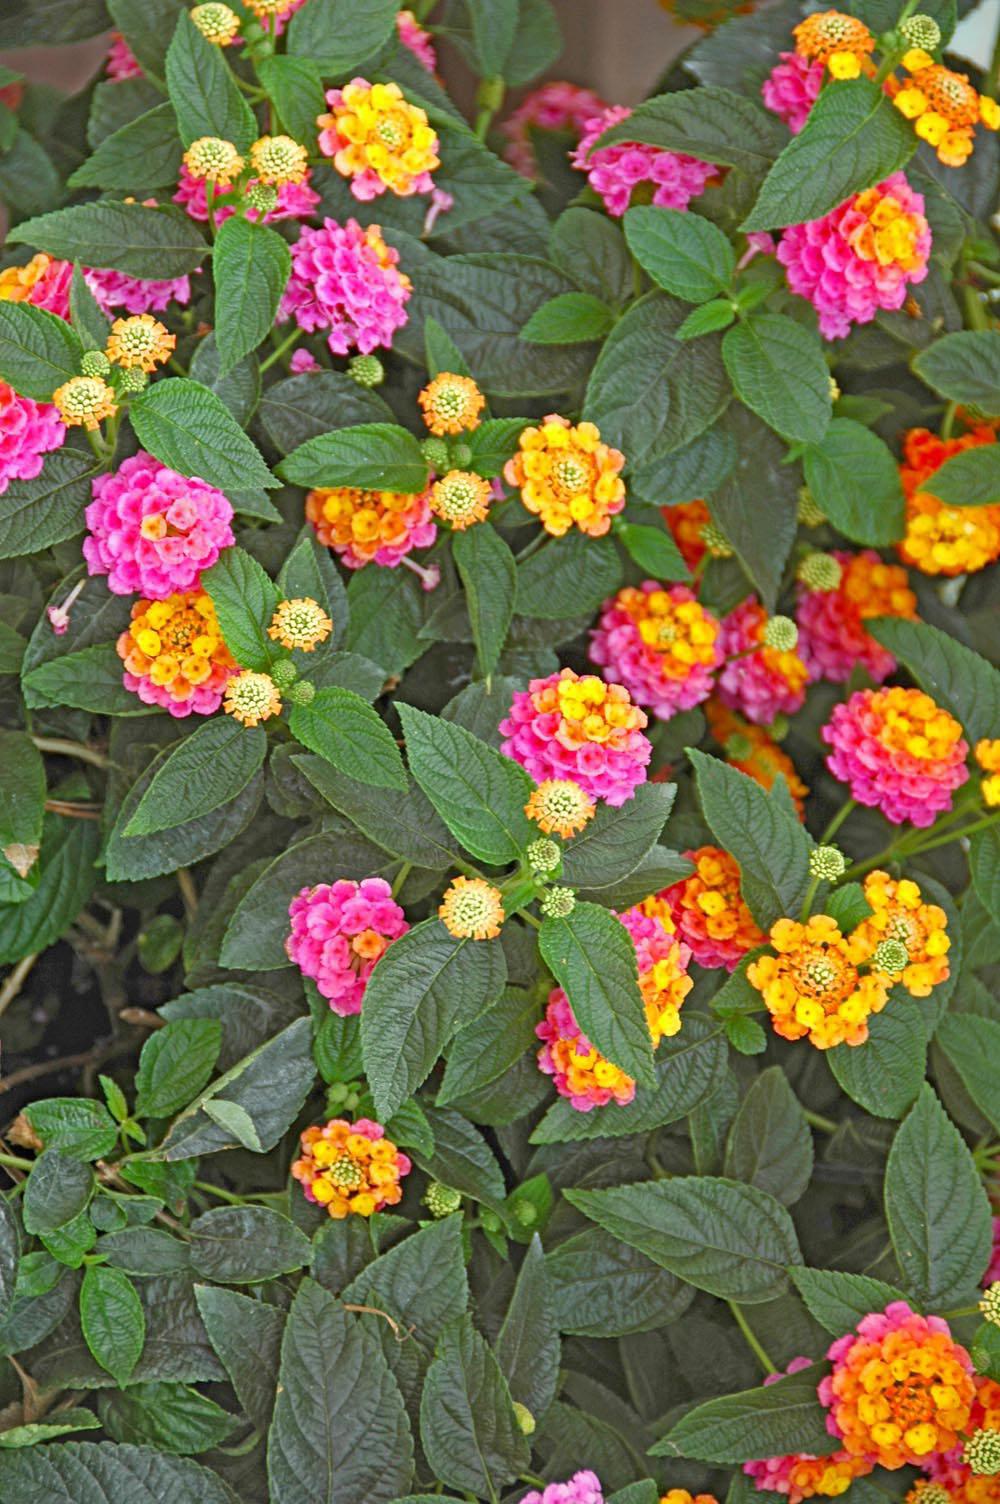 New lantana varieties like this Landmark Sunrise Rose are selected for non-stop blooming and vibrant colors that rival carnival in Rio.